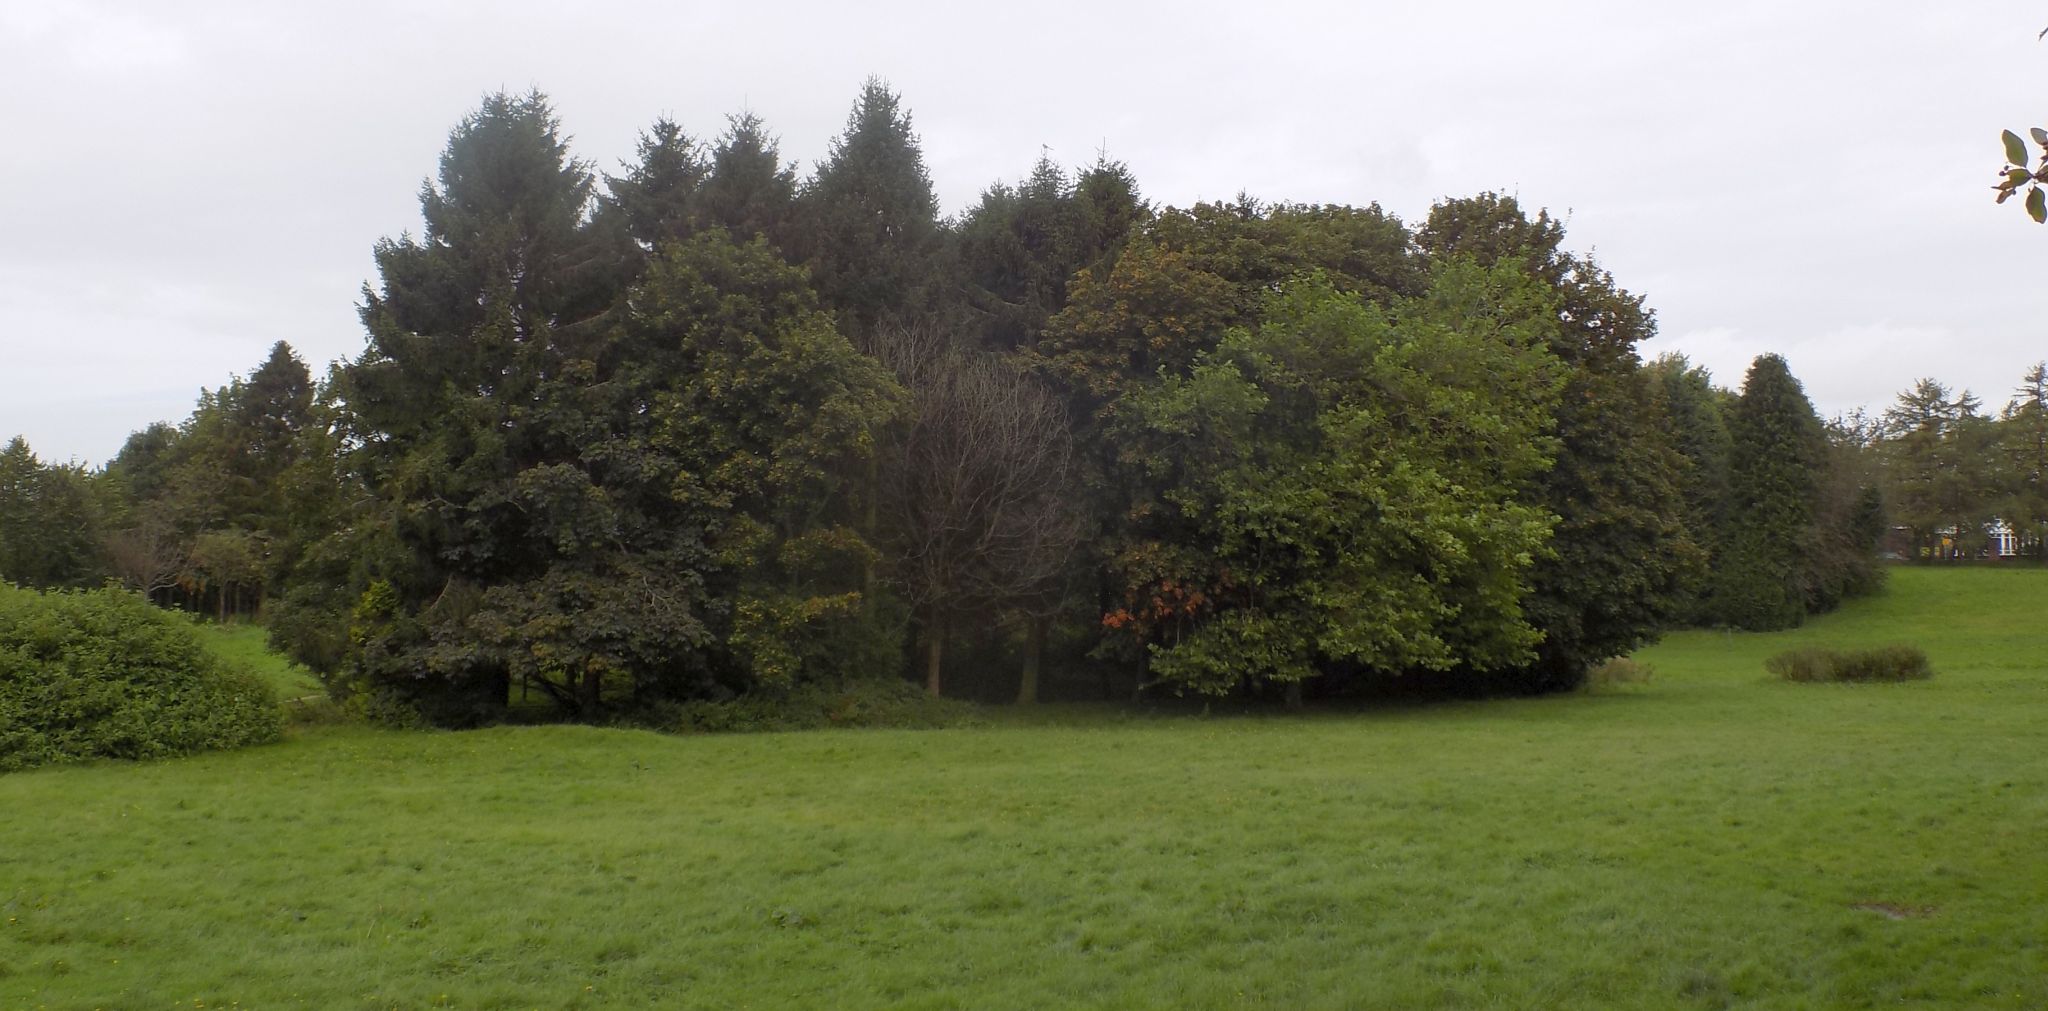 Trees and meadow in Knightswood Park